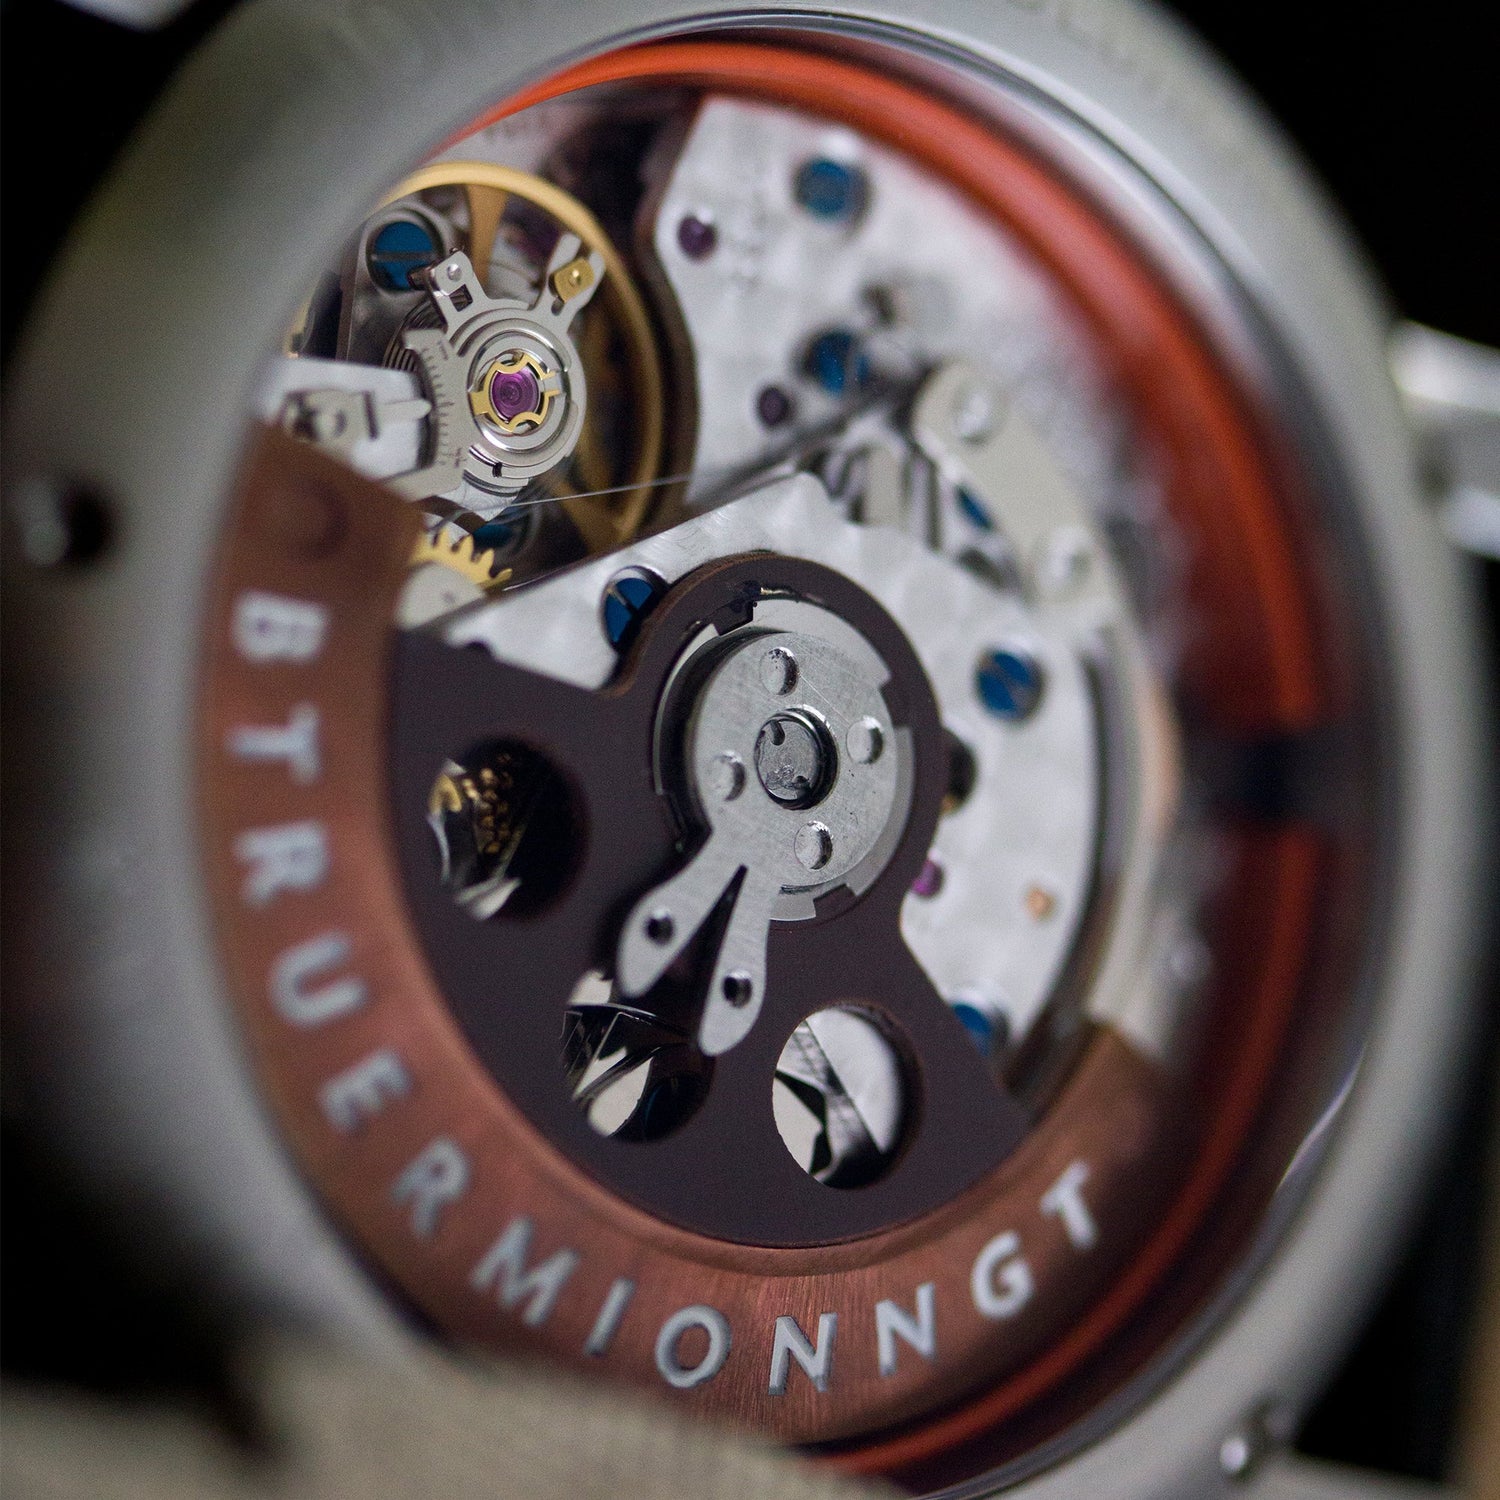 Bremont Chronometers Watches | LTD | ARCHIVE Limited Edition Codebreaker